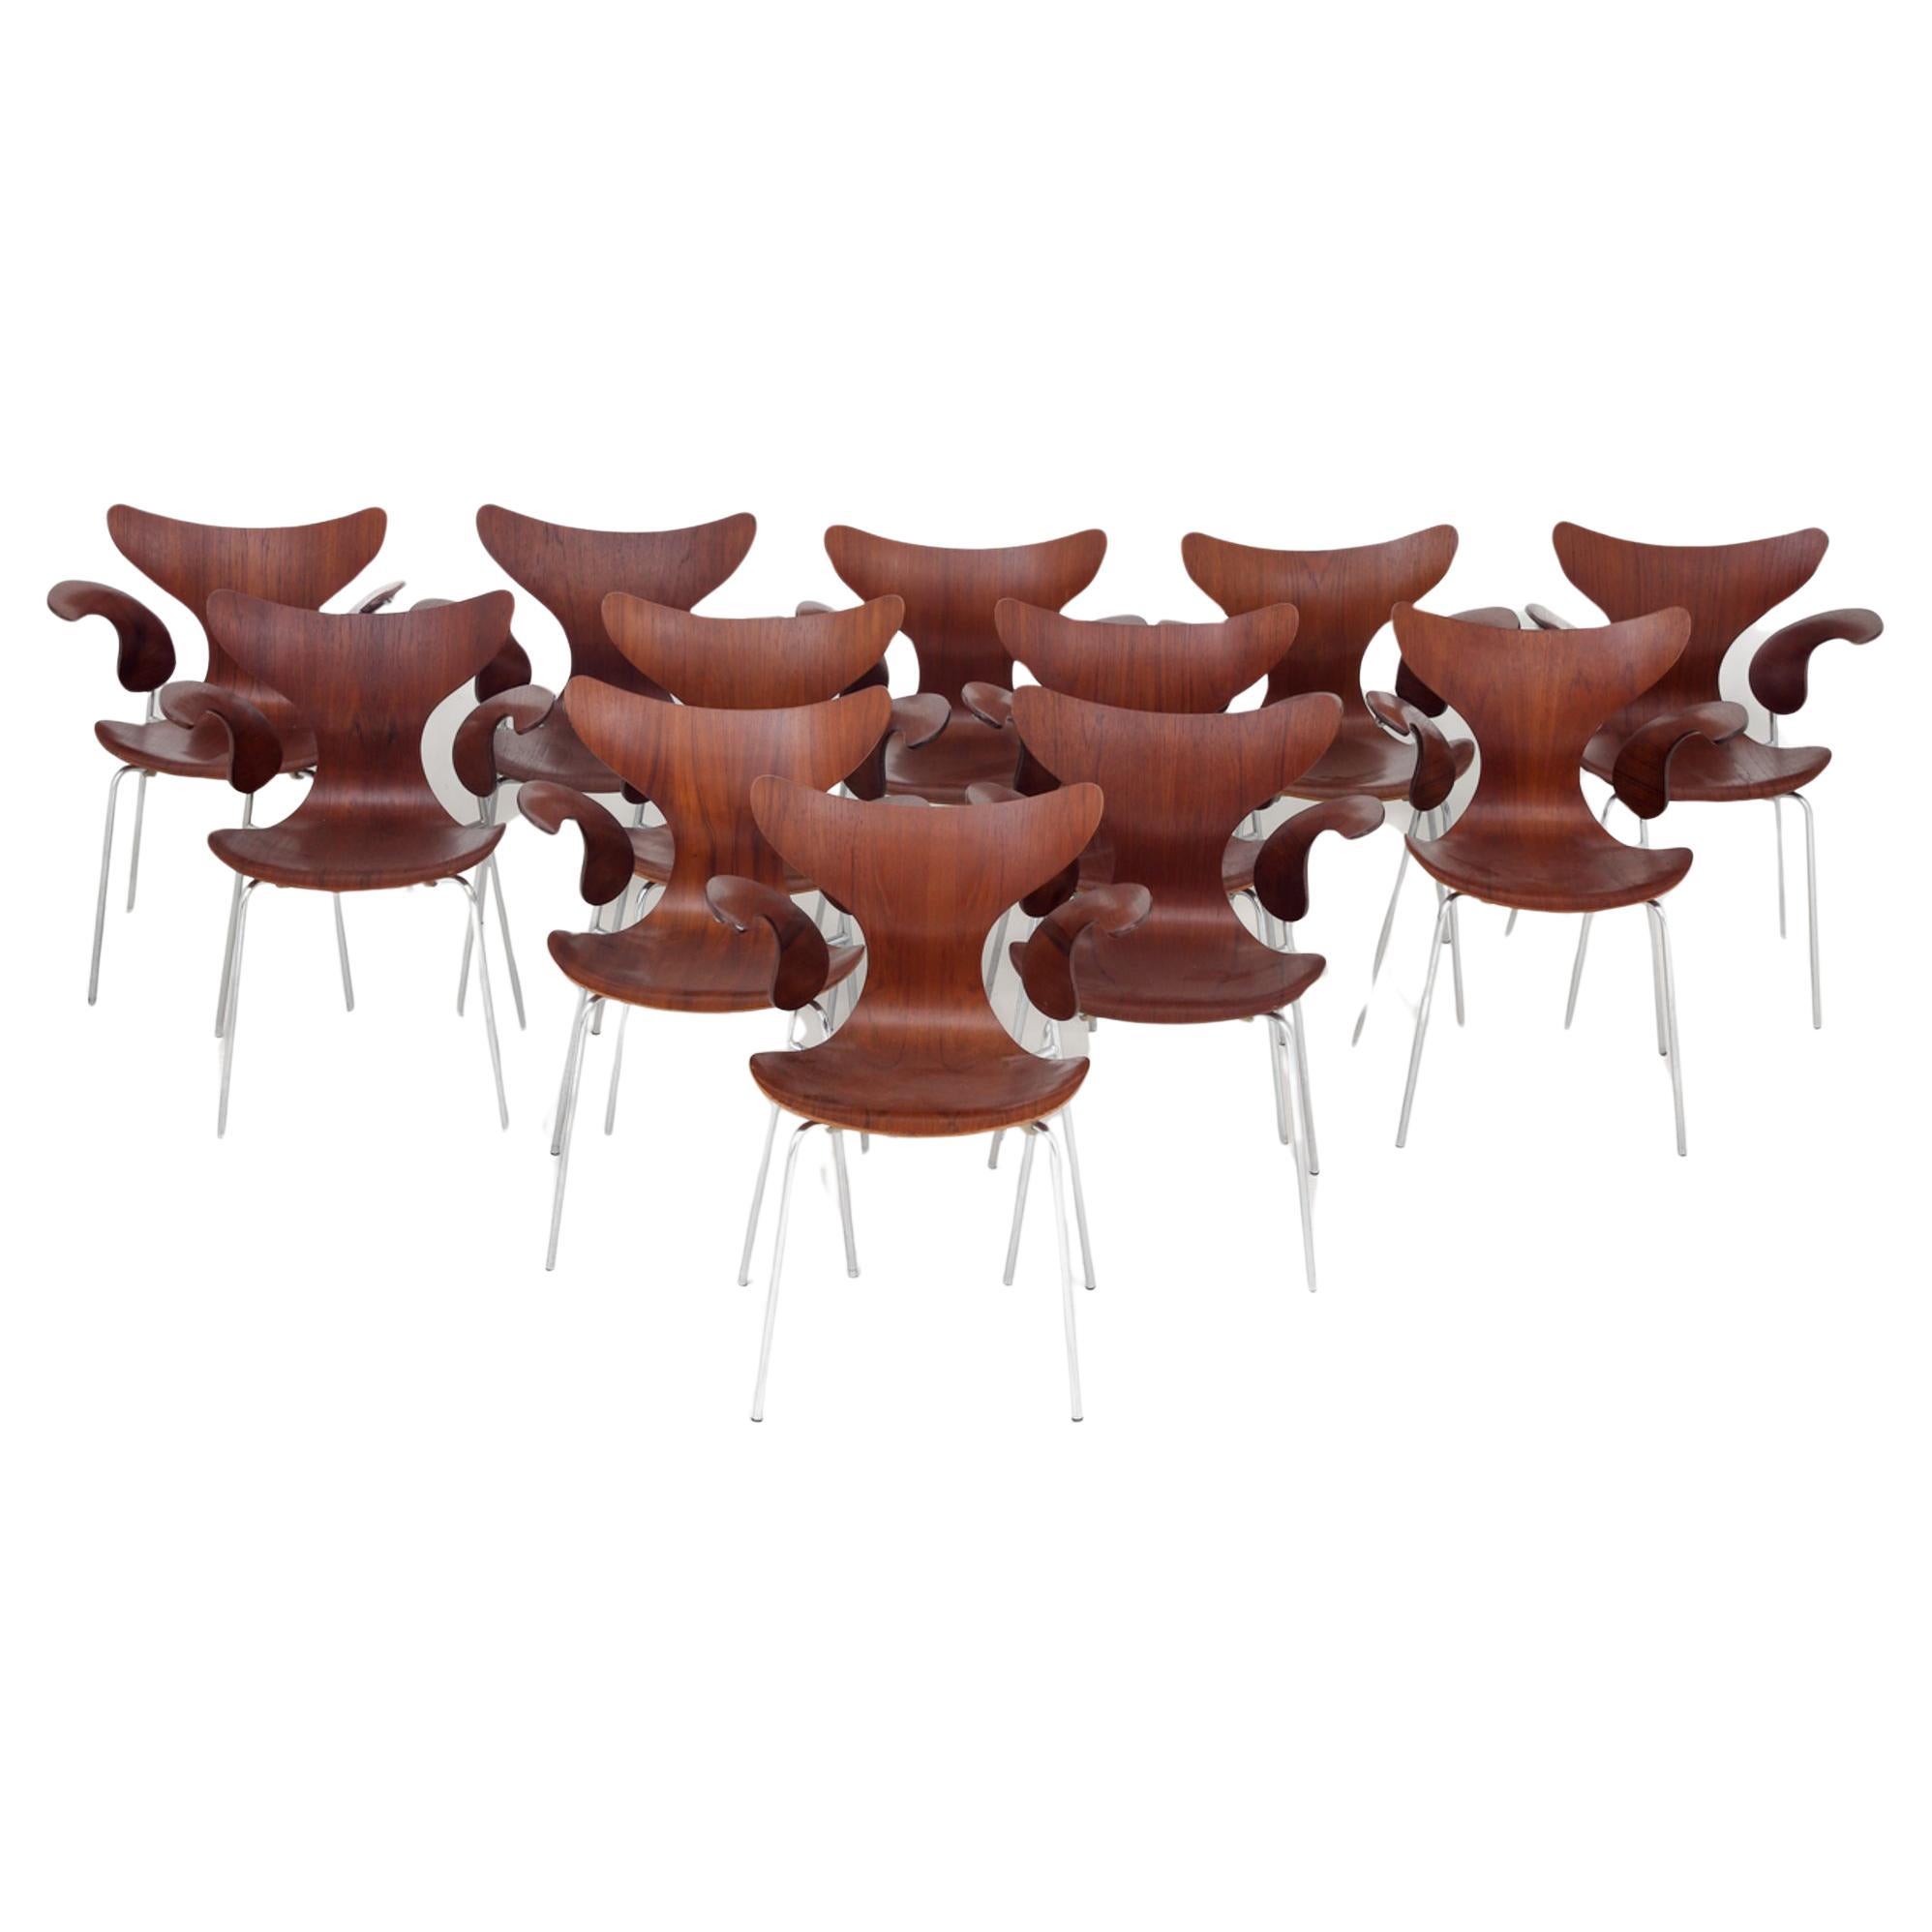 Large set of 12 rare 'Lily Chairs' by Arne Jacobsen For Sale